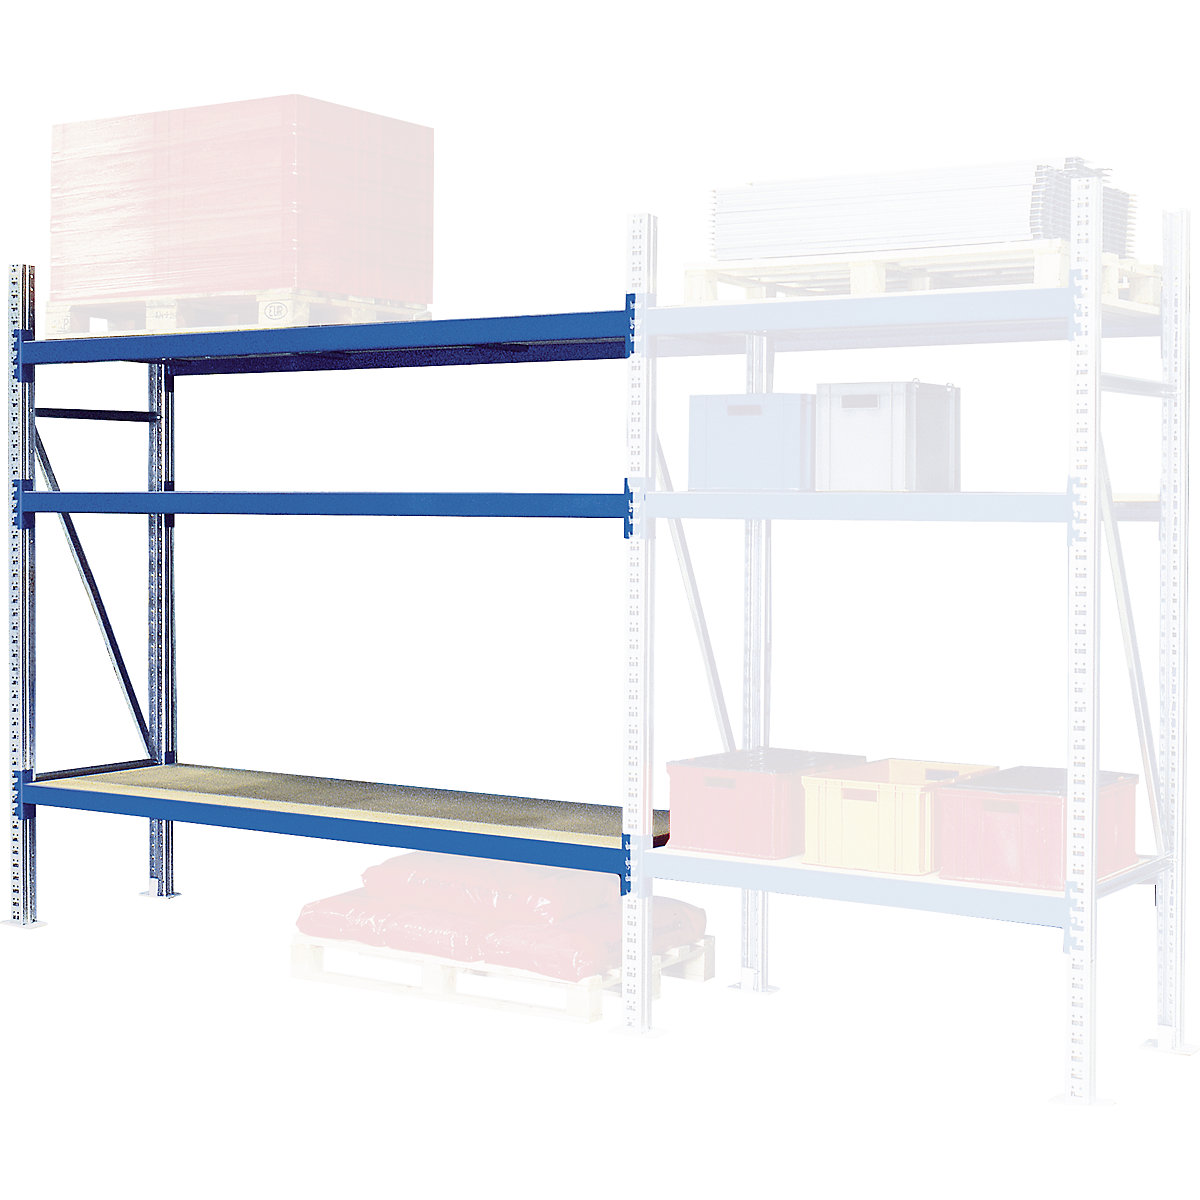 Rayonnage extra-large grande capacité – eurokraft pro, charge max. / rayonnage 4000 kg, h x l x p 2000 x 2700 x 600 mm, rayonnage additionnel, bleu RAL 5010-8